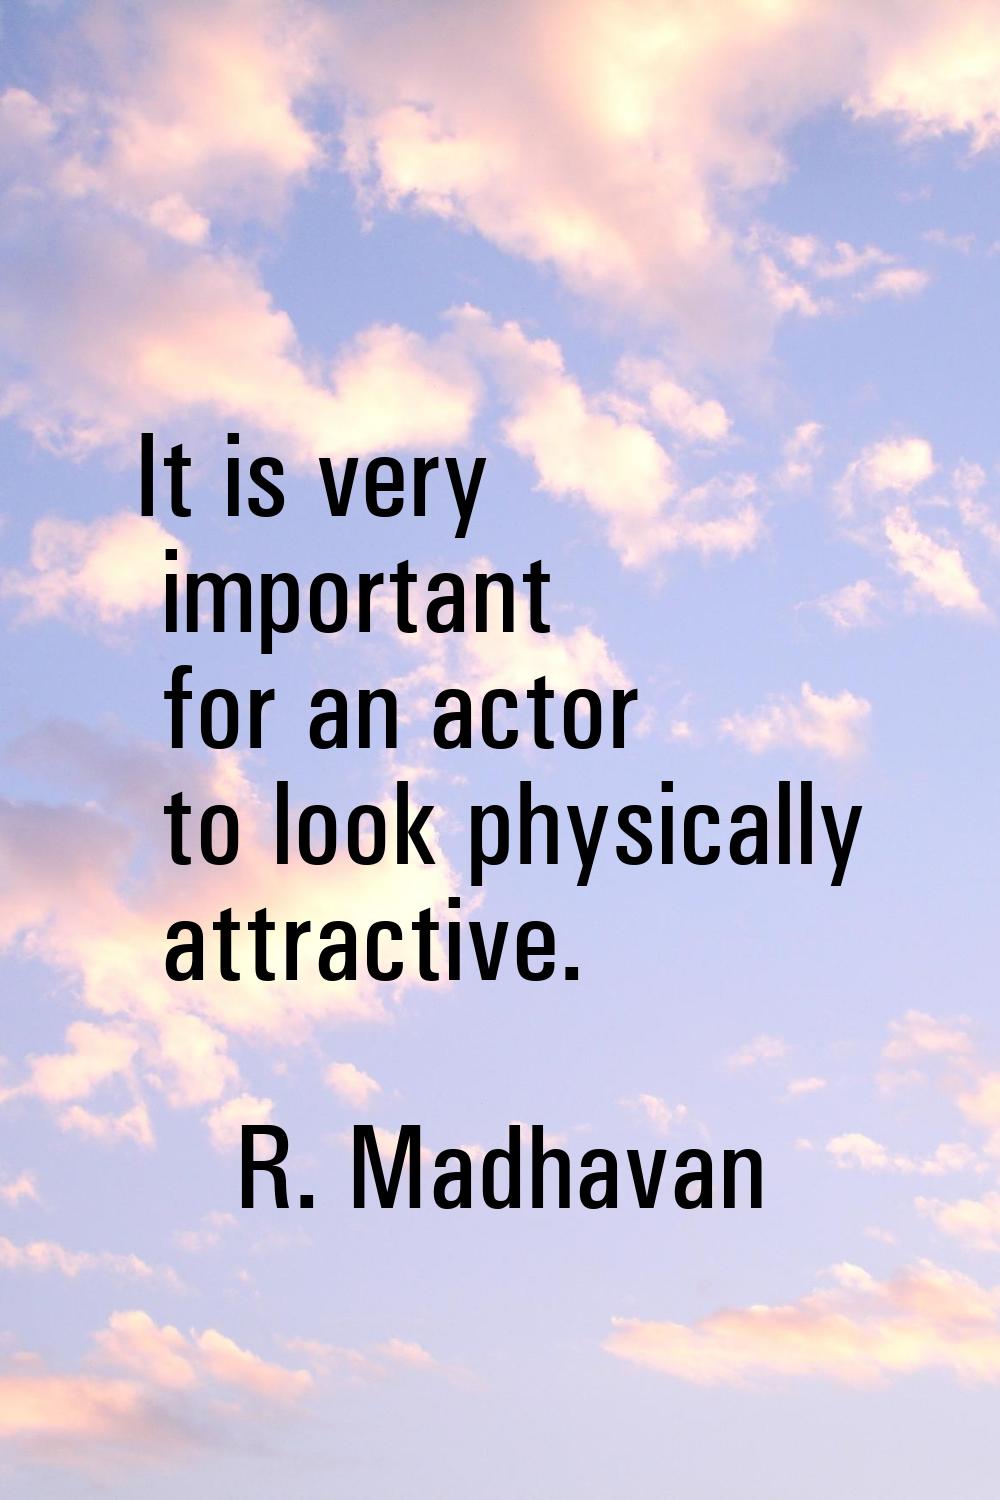 It is very important for an actor to look physically attractive.